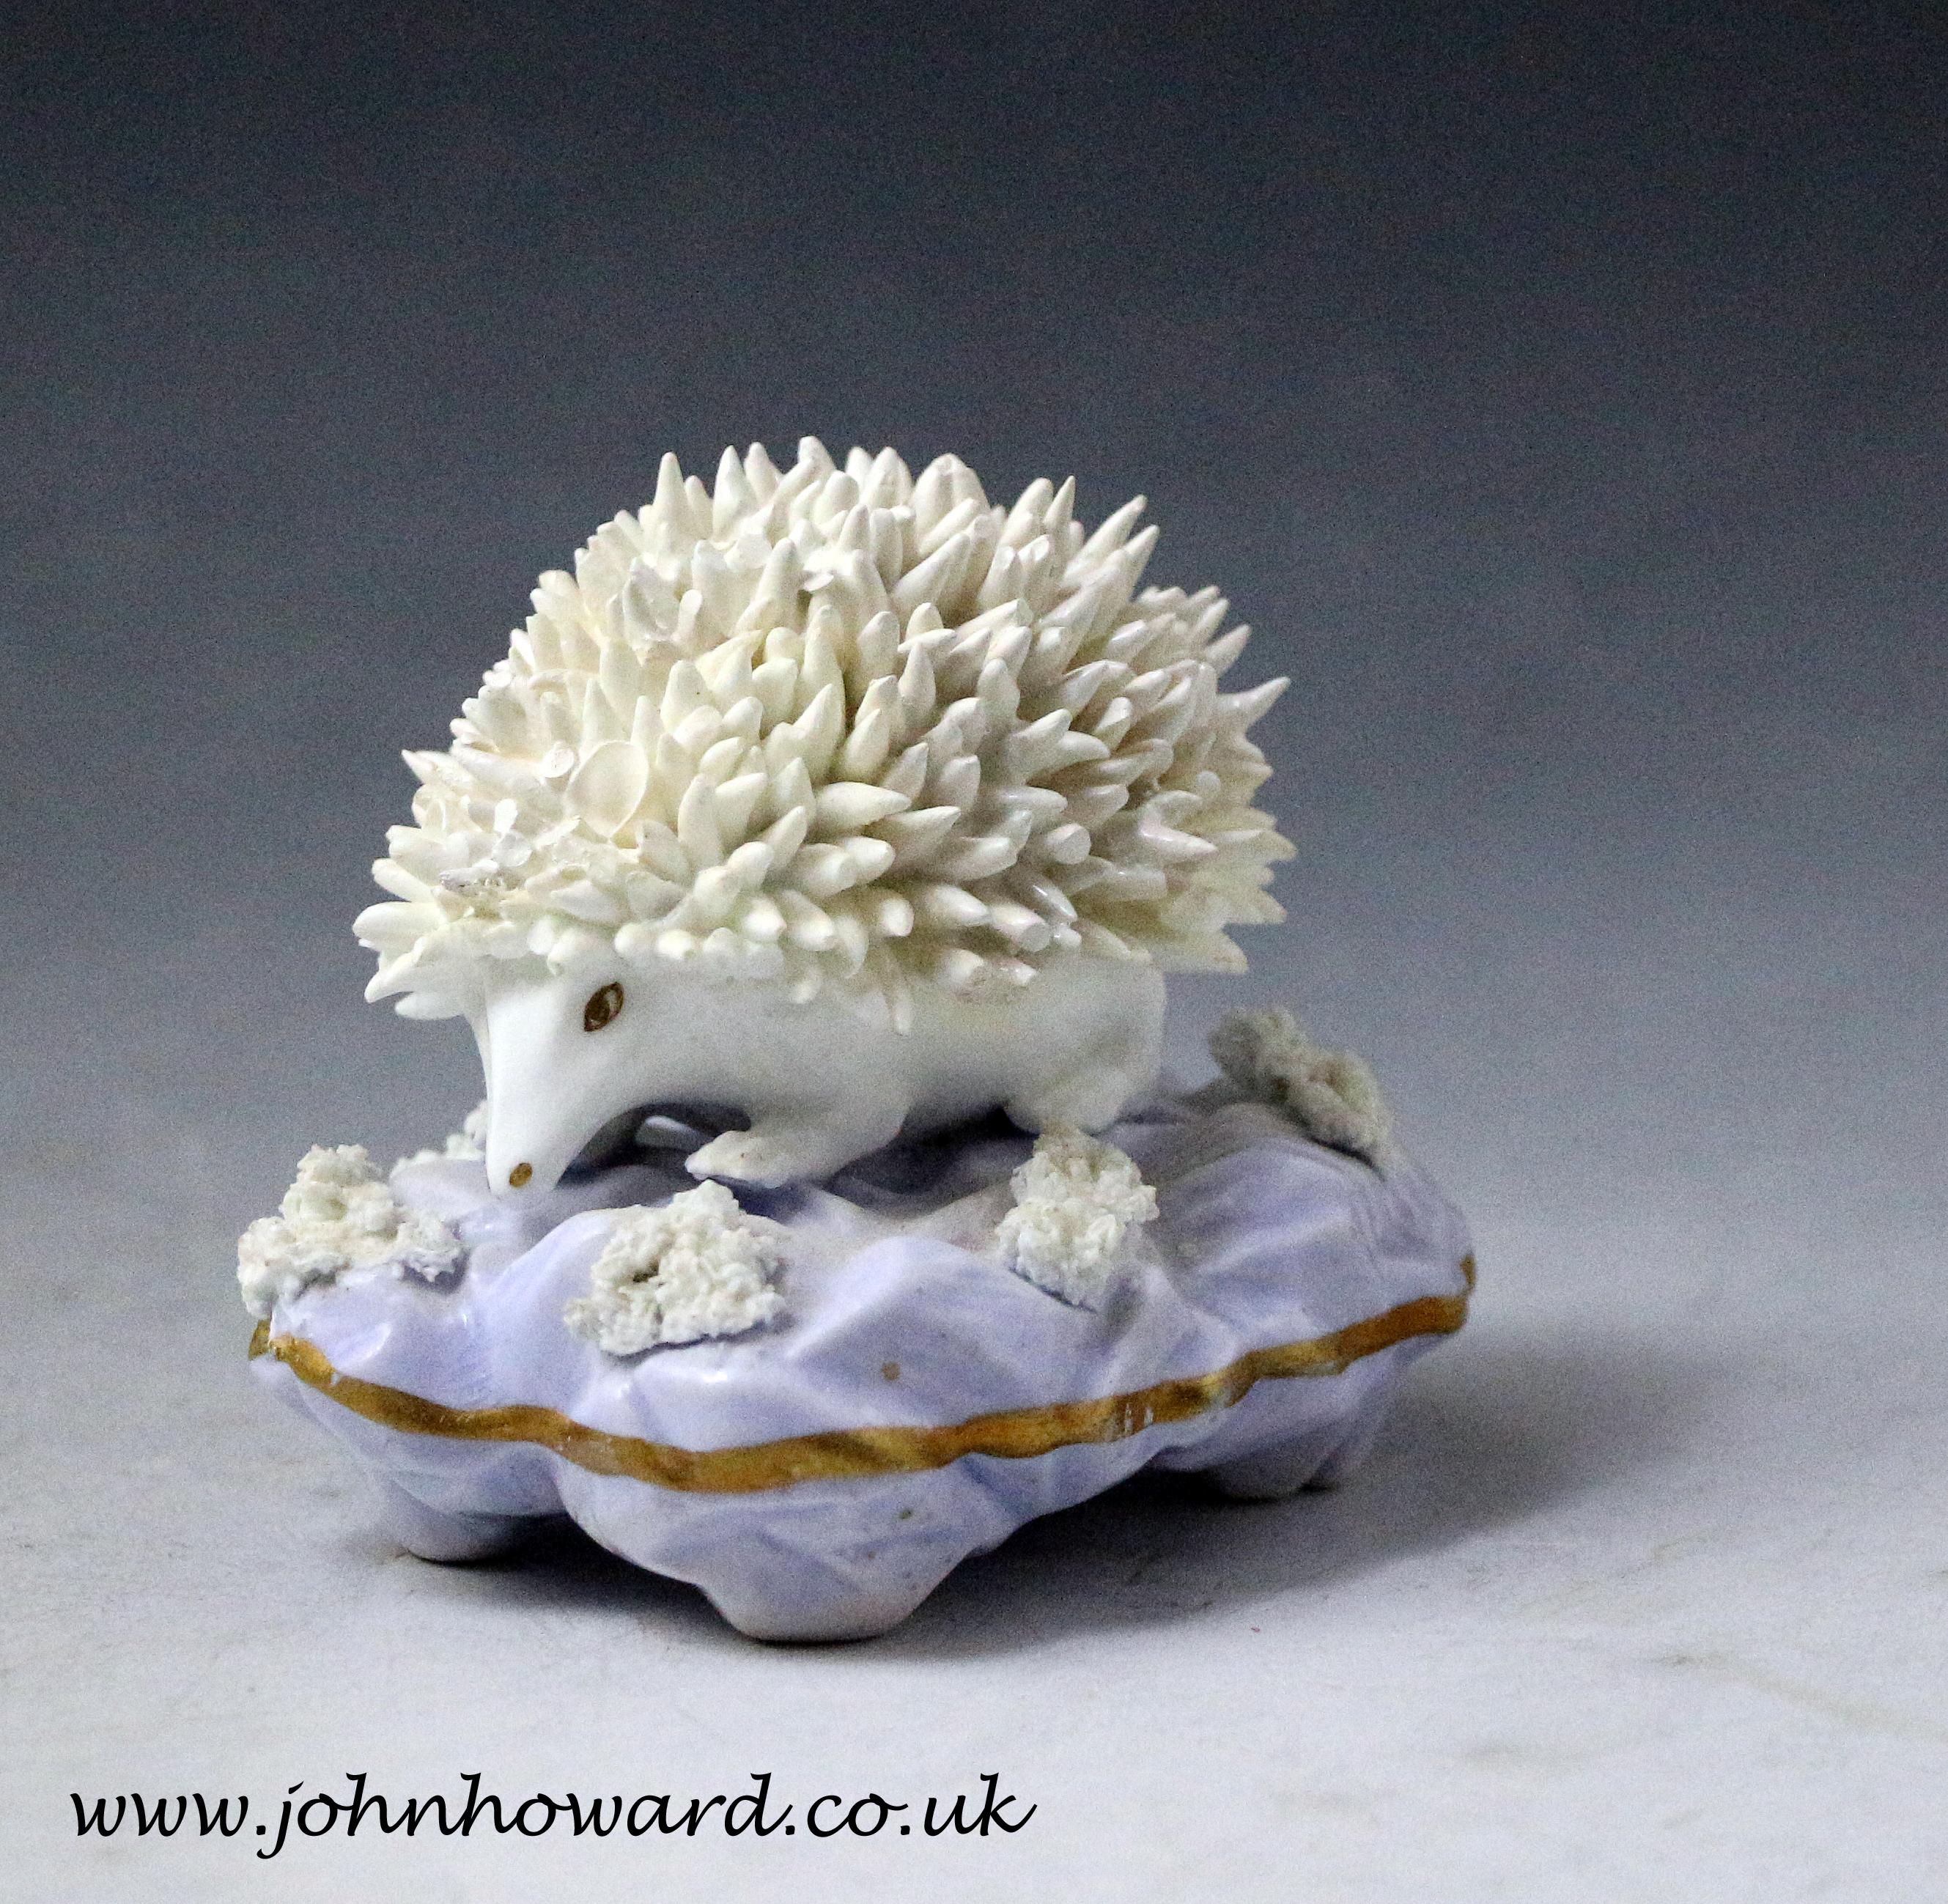 Dated: 1835 Staffordshire, England

Antique Staffordshire porcelain figure of a hedgehog, early 19th century England, made by Samuel Alcock. The hedgehog is modeled on a mauve rocky shaped base and is a very rare figure. D.G. Rice in his reference